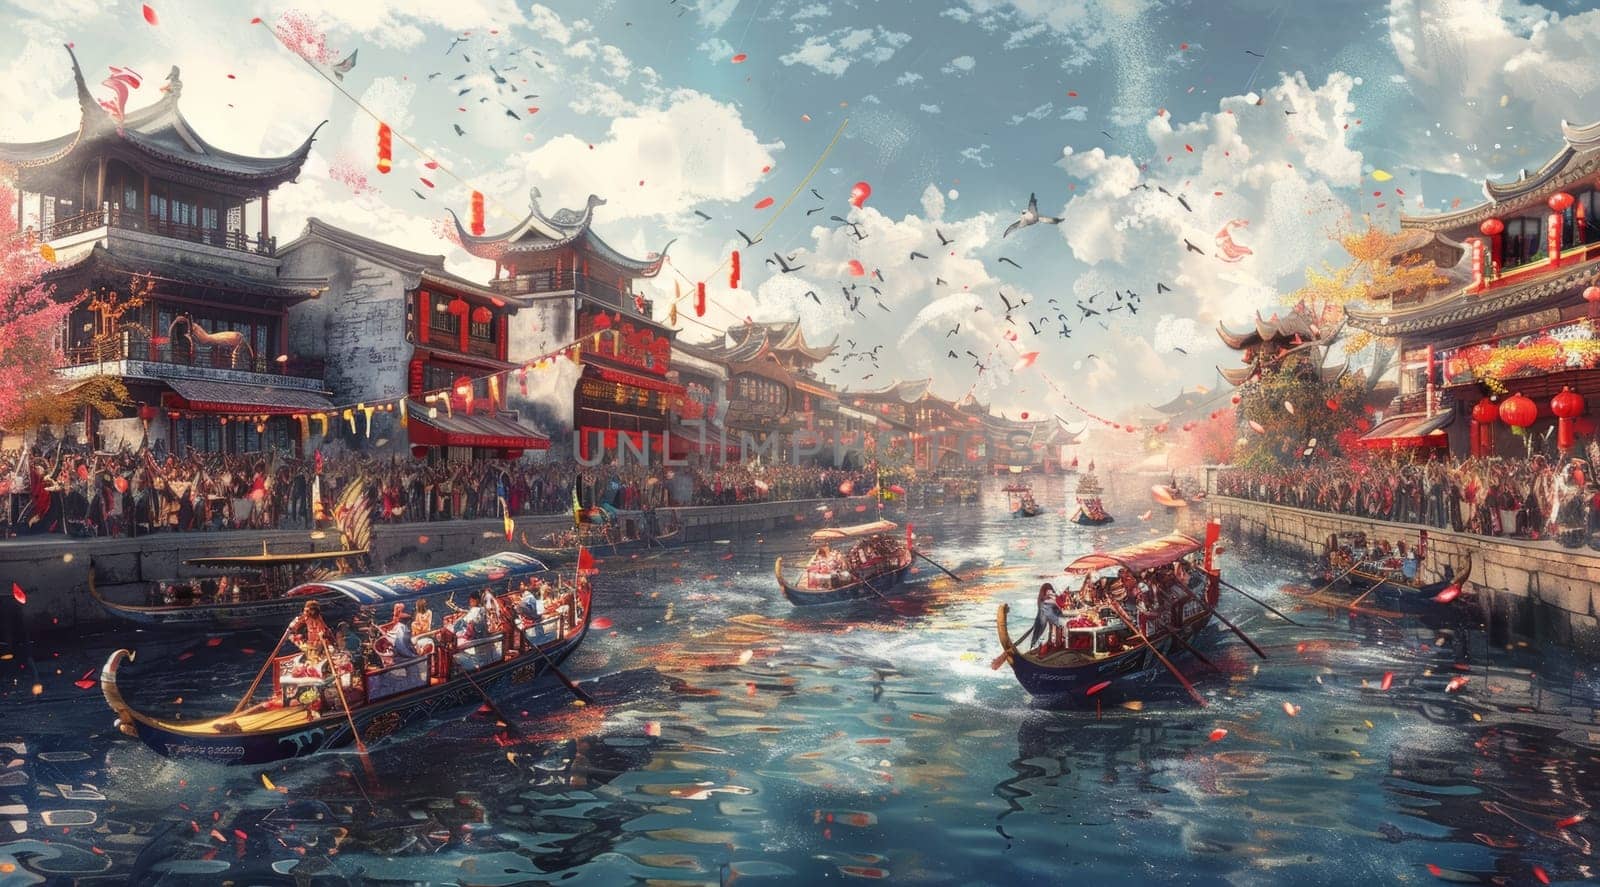 A procession of dragon boats festively makes its way under bridges adorned with red lanterns, amidst a backdrop of grand traditional architecture